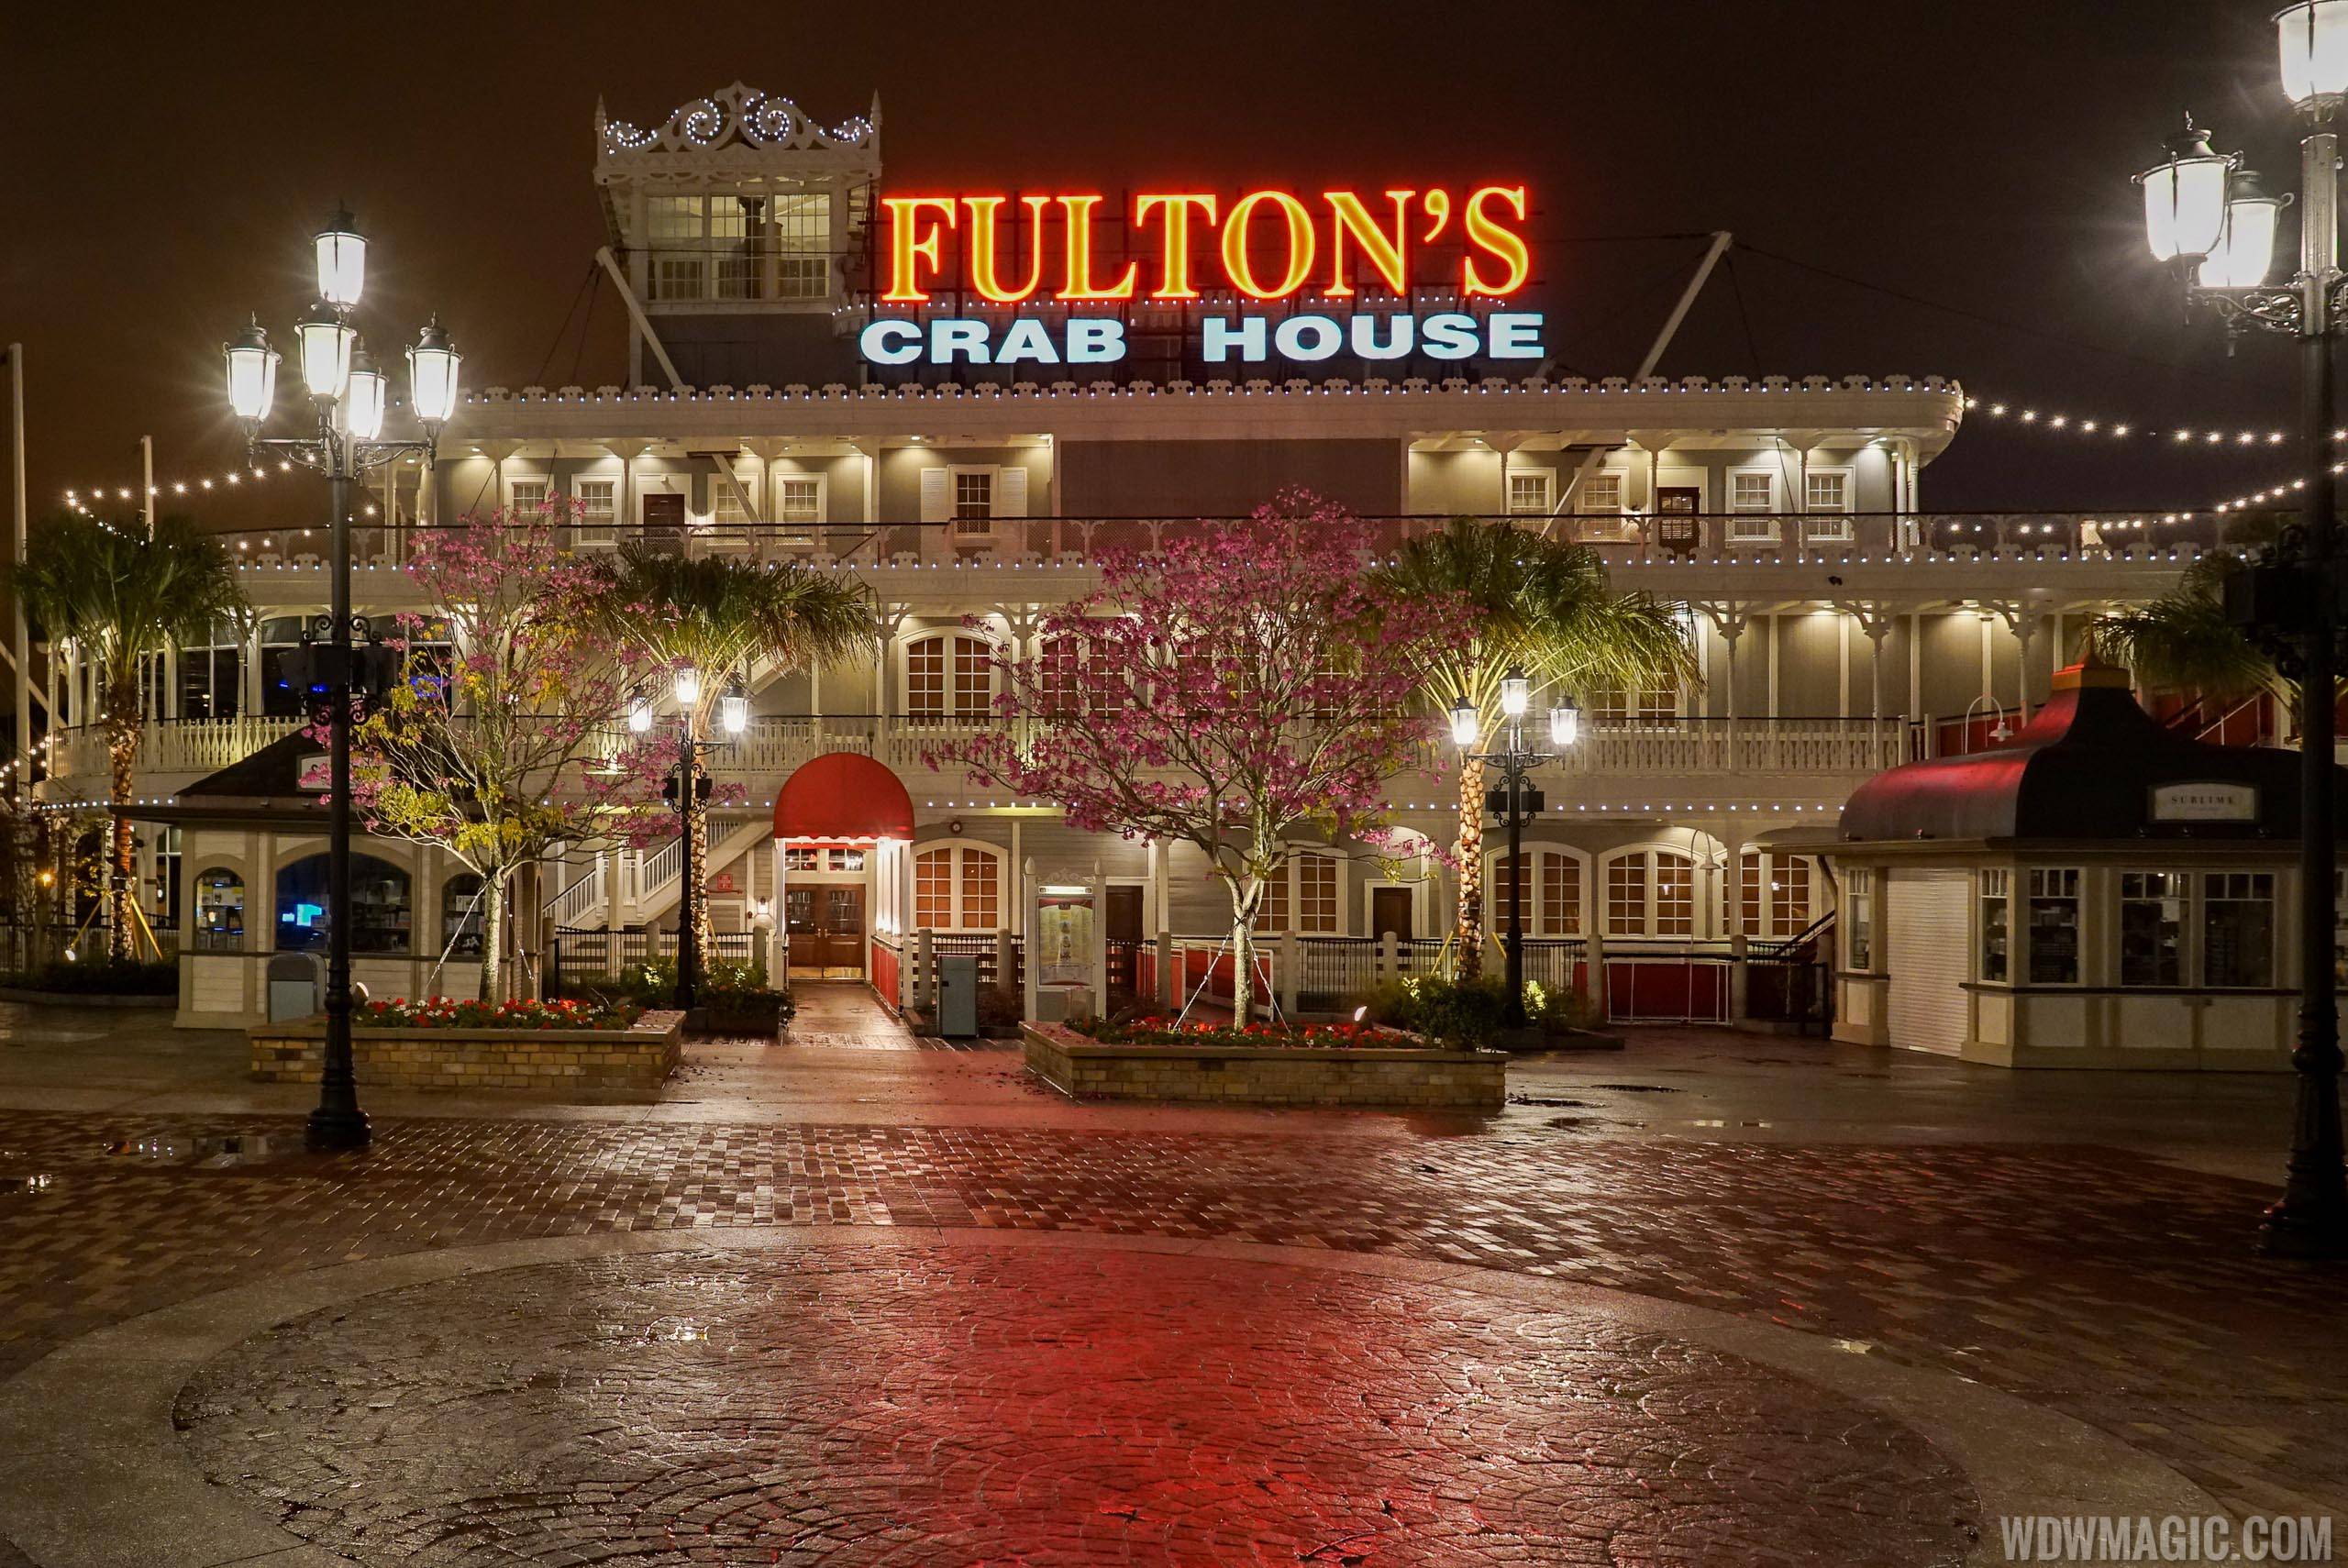 Fulton's Crab House overview